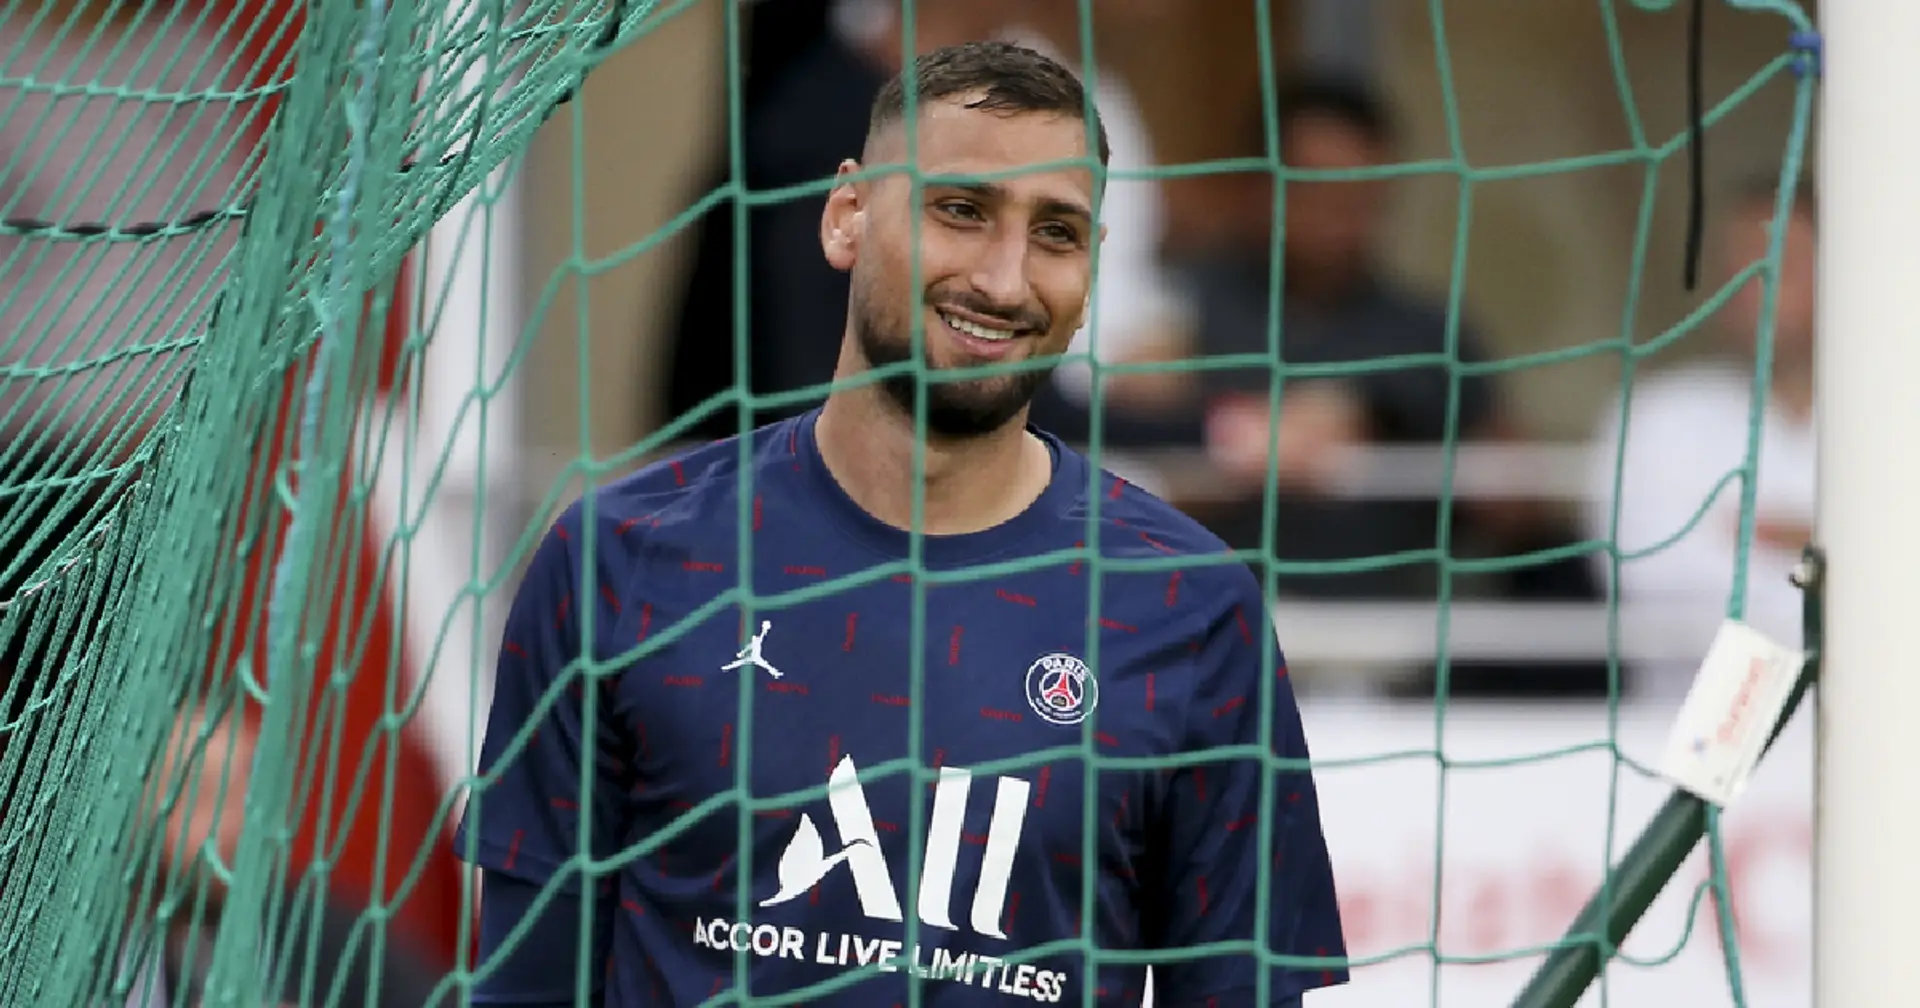 OFFICIAL: PSG starting XI v Clermont revealed, Donnarumma debuts